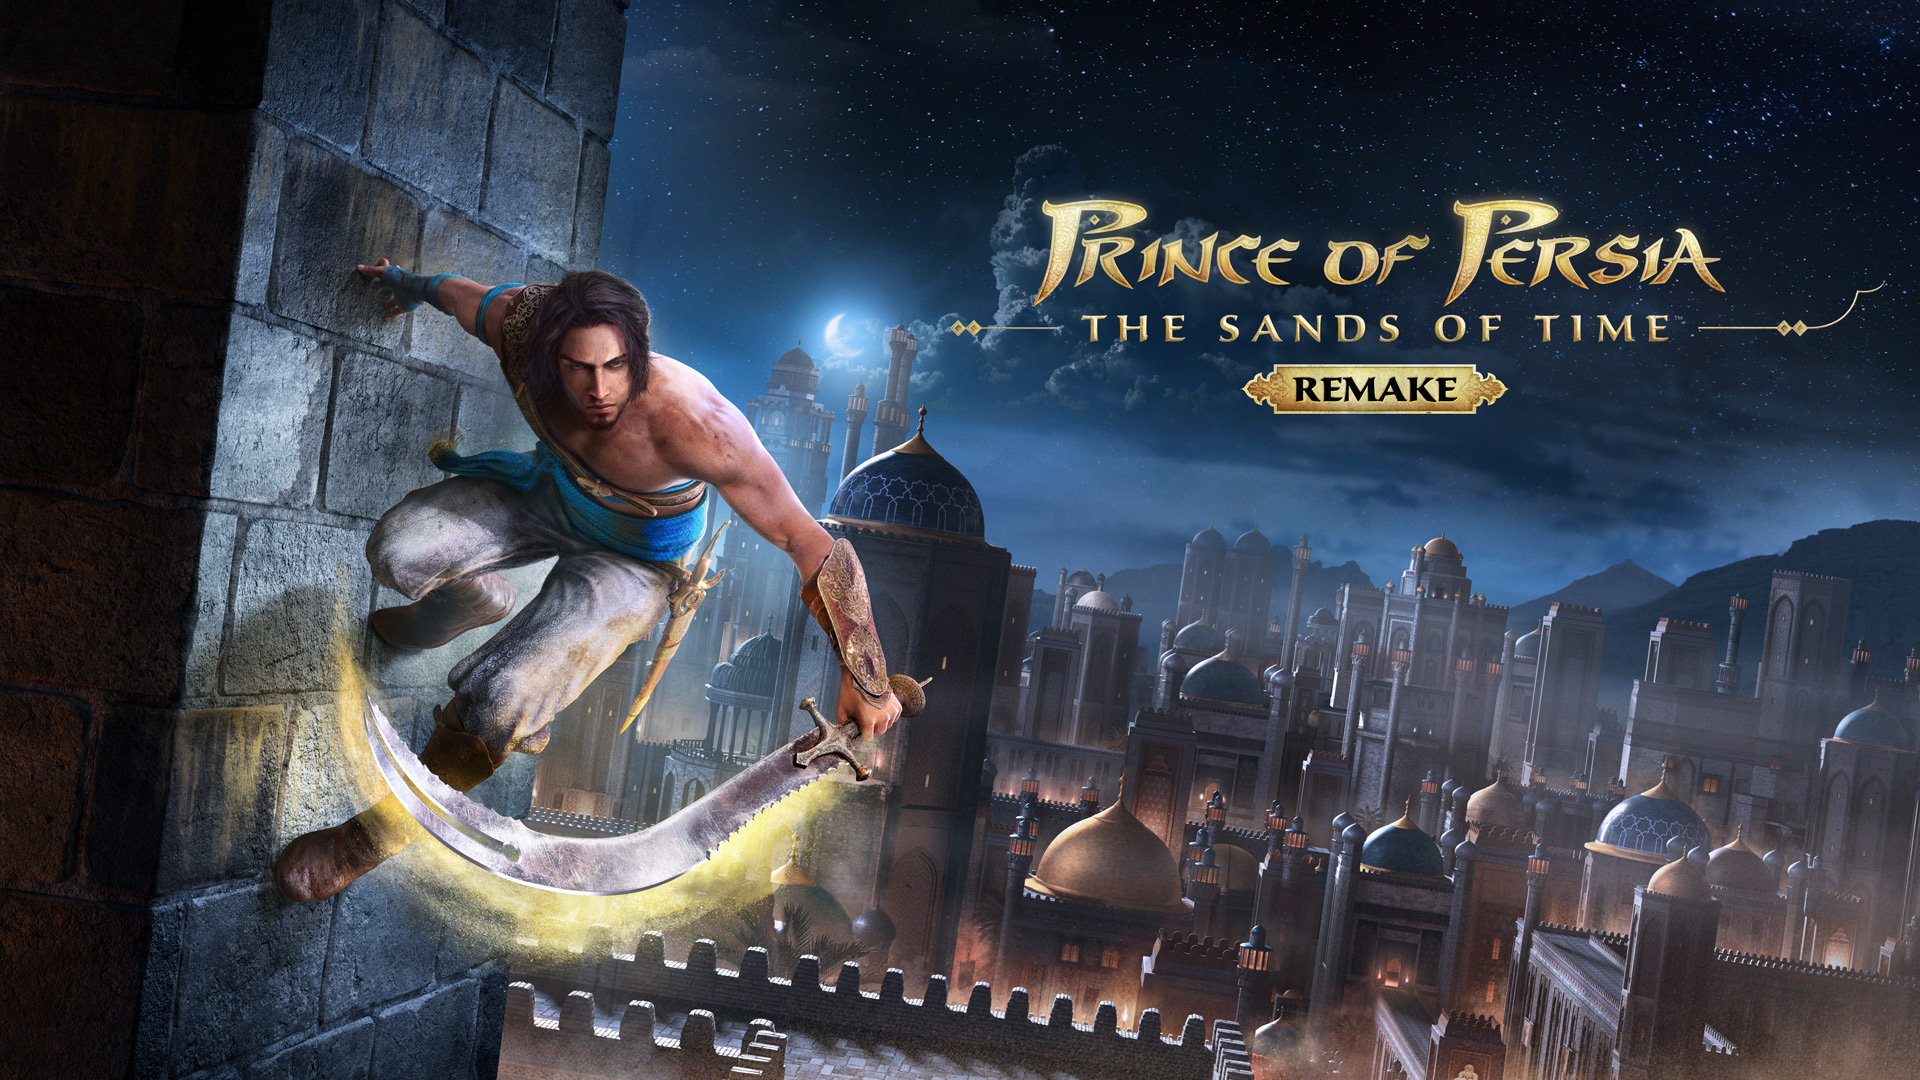 Prince of Persia The Sands of Time Remake Ubisoft Prince of Persia ريميك